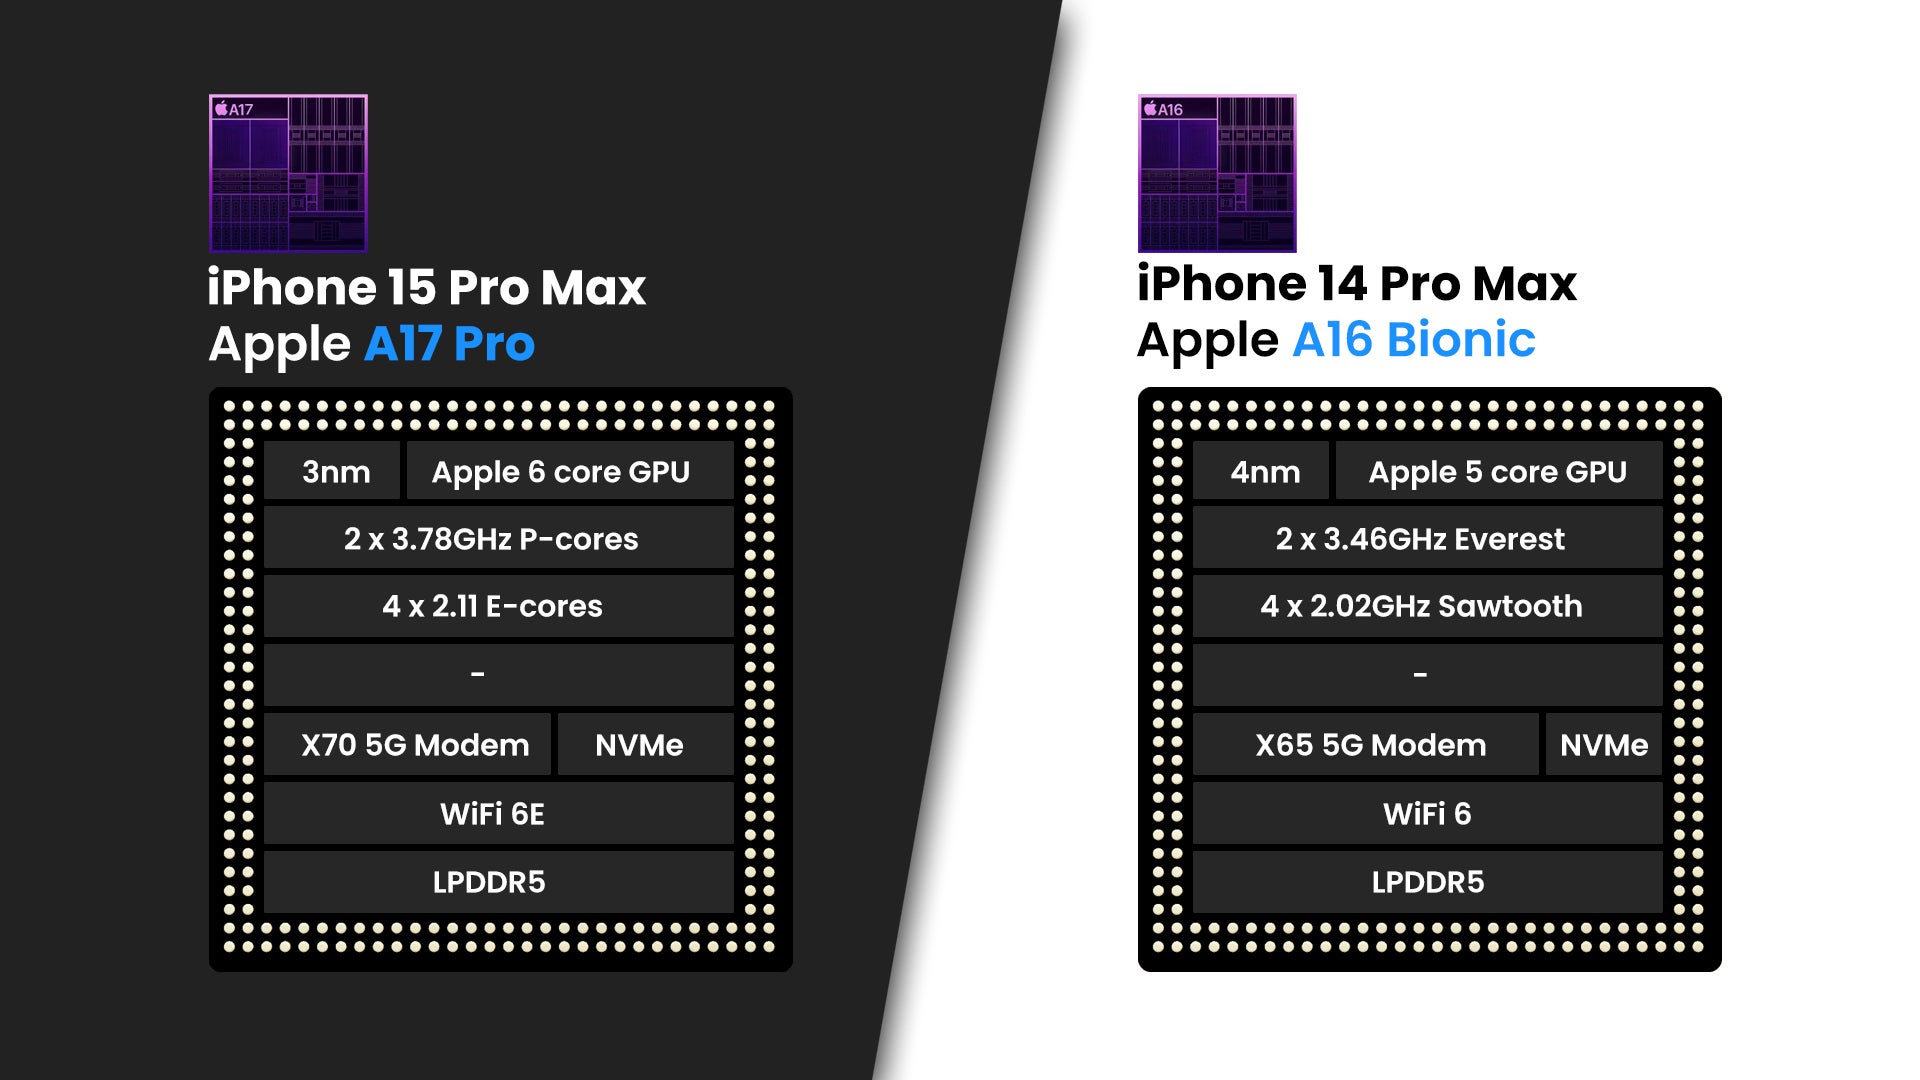 Apple iPhone 15 Pro Max vs iPhone 14 Pro Max: main differences